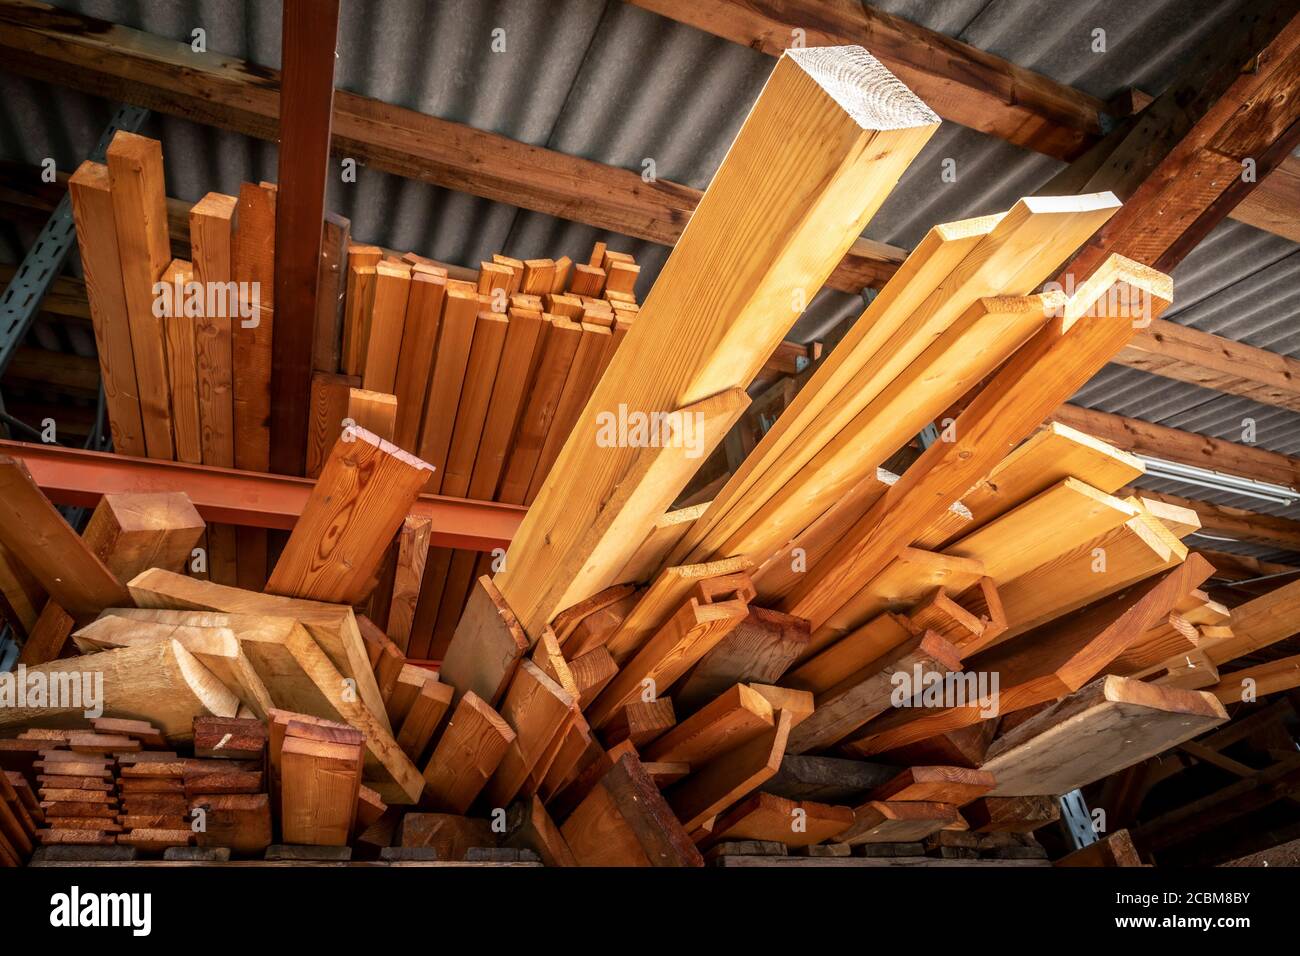 pile of timber in woodworking industry Stock Photo